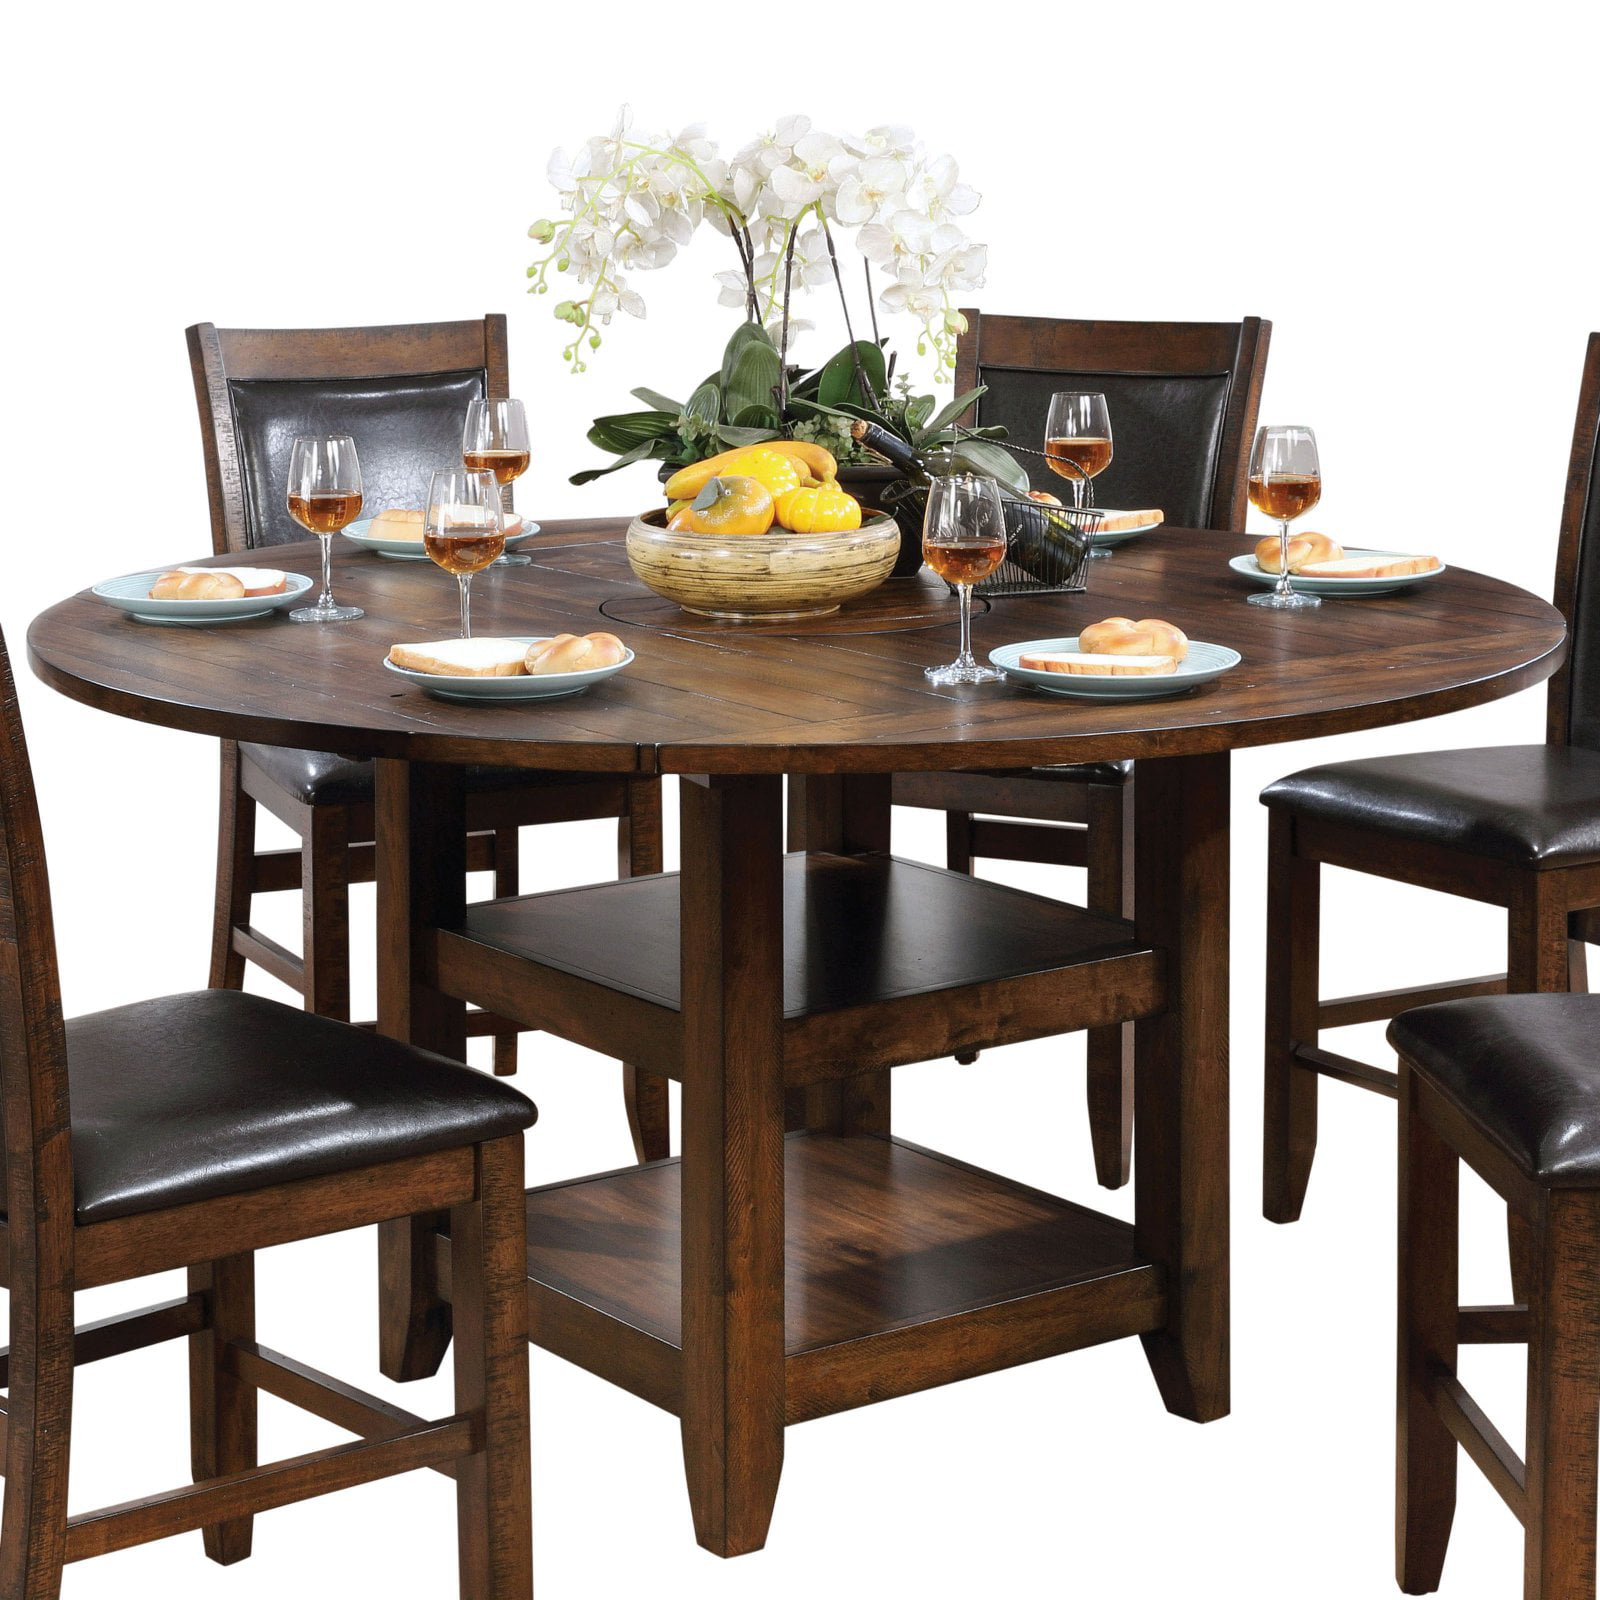 Furniture Of America Bilone Transitional Plank Style Round Counter Height Dining Table Walmartcom Walmartcom